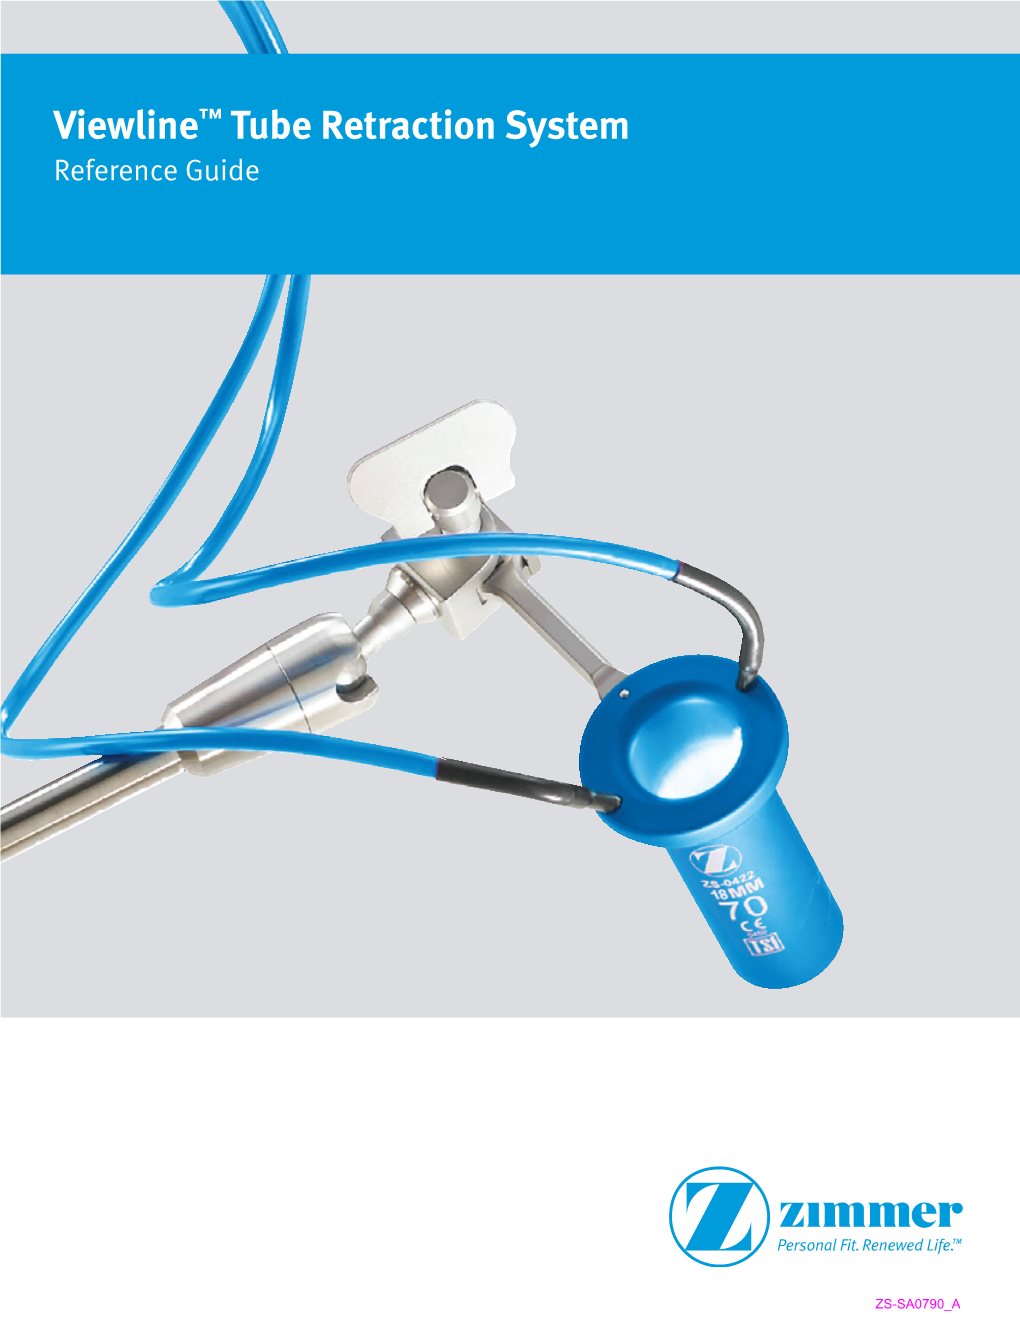 Viewline™ Tube Retraction System Reference Guide